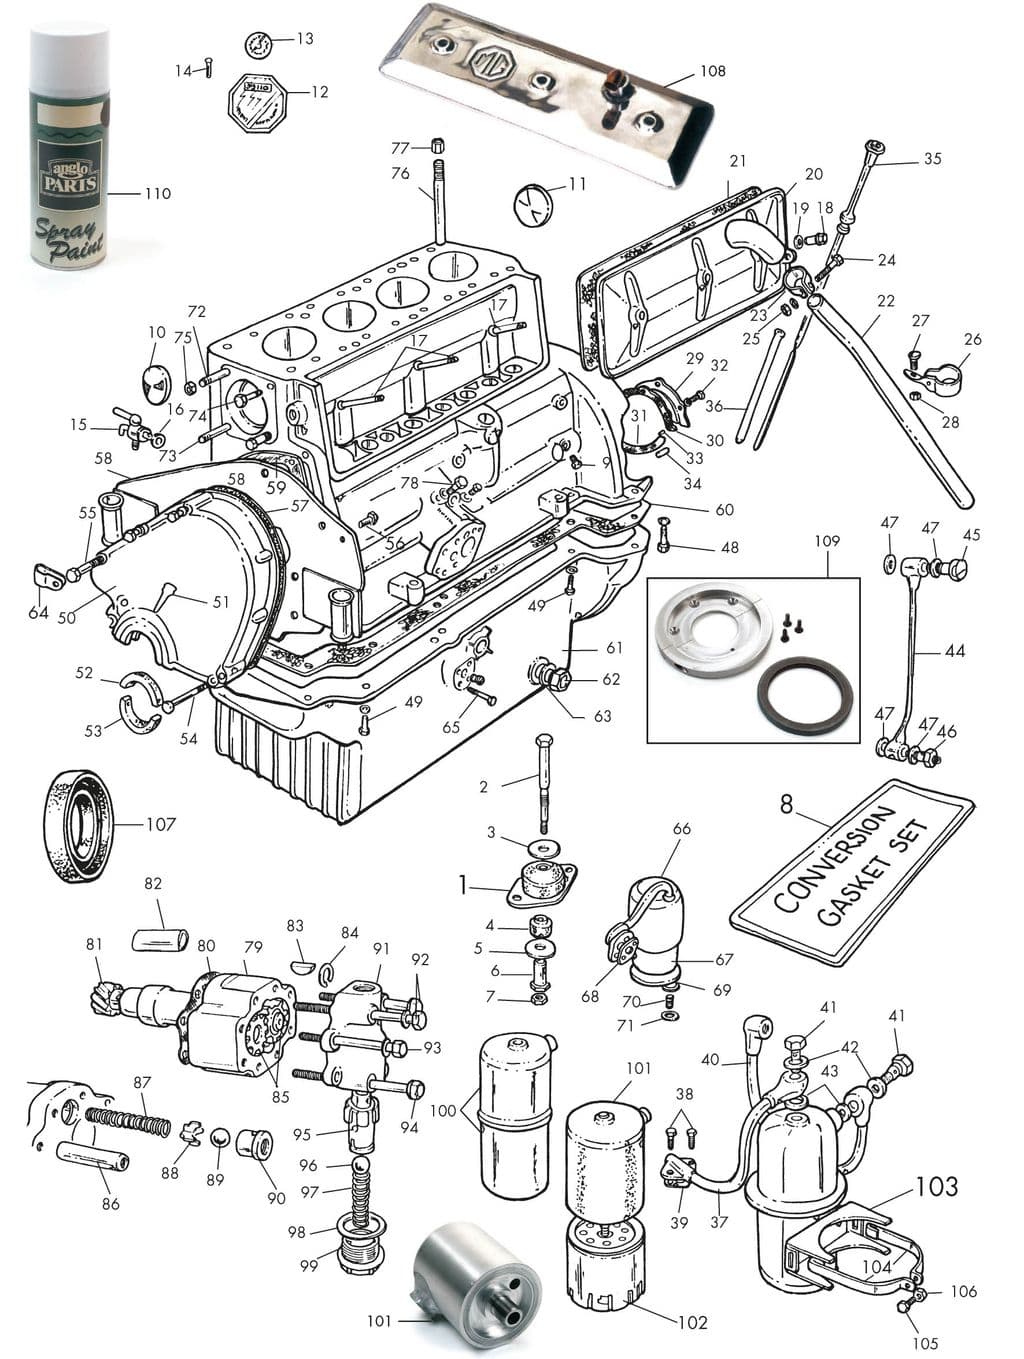 MGTC 1945-1949 - Engine block & parts | Webshop Anglo Parts - Engine block & oil system - 1